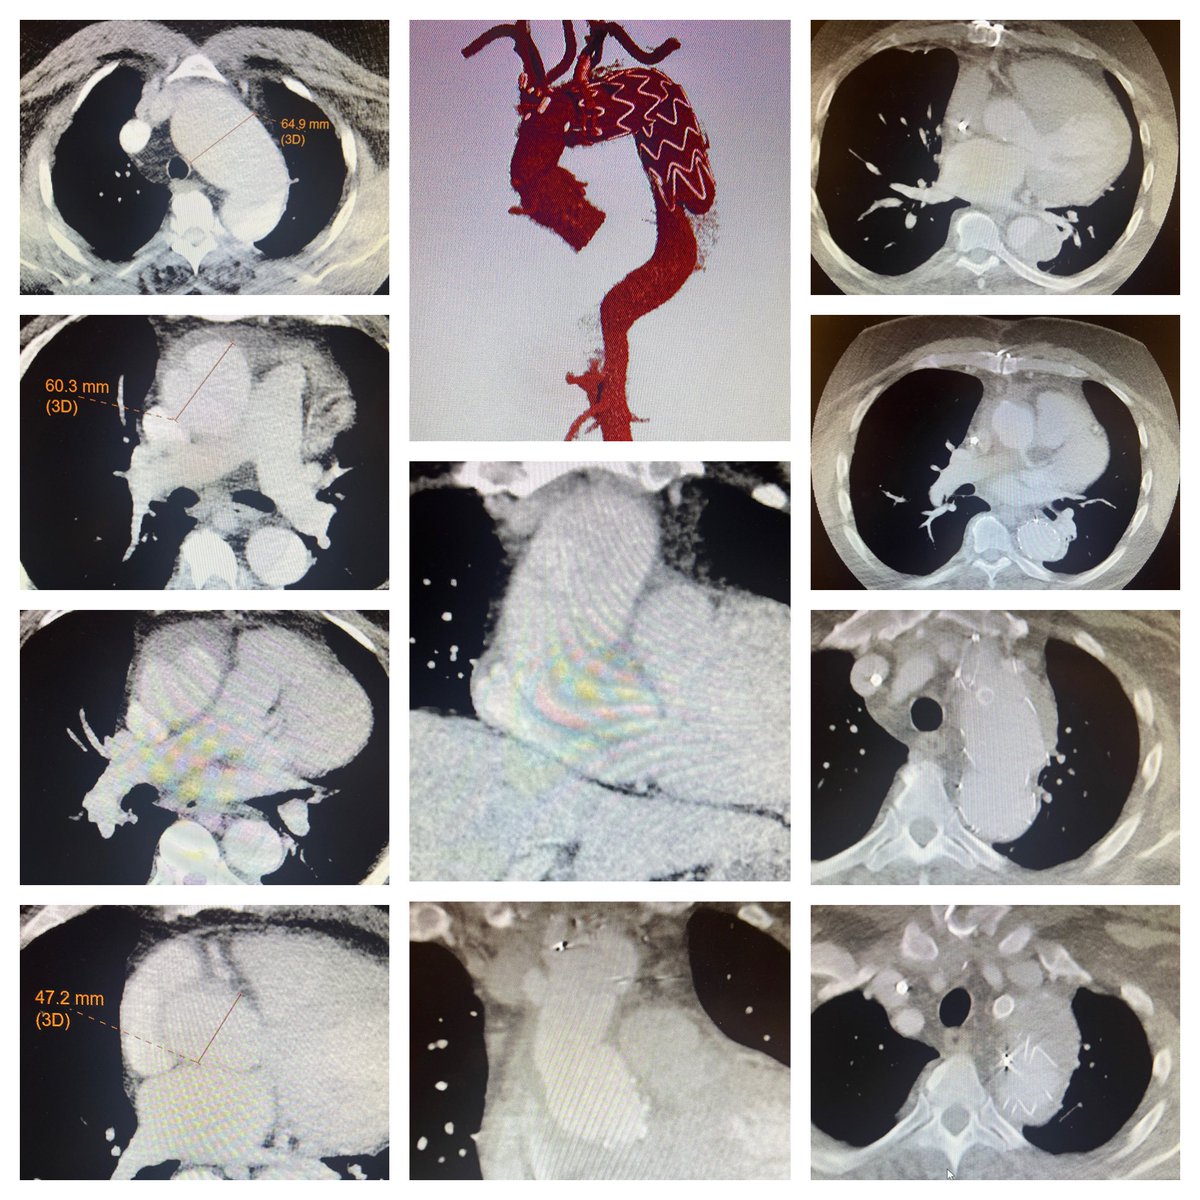 Quadragenarian with acute Stanford type A/DeBakey type I aortic dissection, root/ascending/proximal transverse arch #aorticaneurysm, uncontrolled hypertension, LVH, CKD stage 5 (preop GFR < 15; not yet on dialysis), BMI 44, OSA, treated with ascending/zone 2 arch replacement with